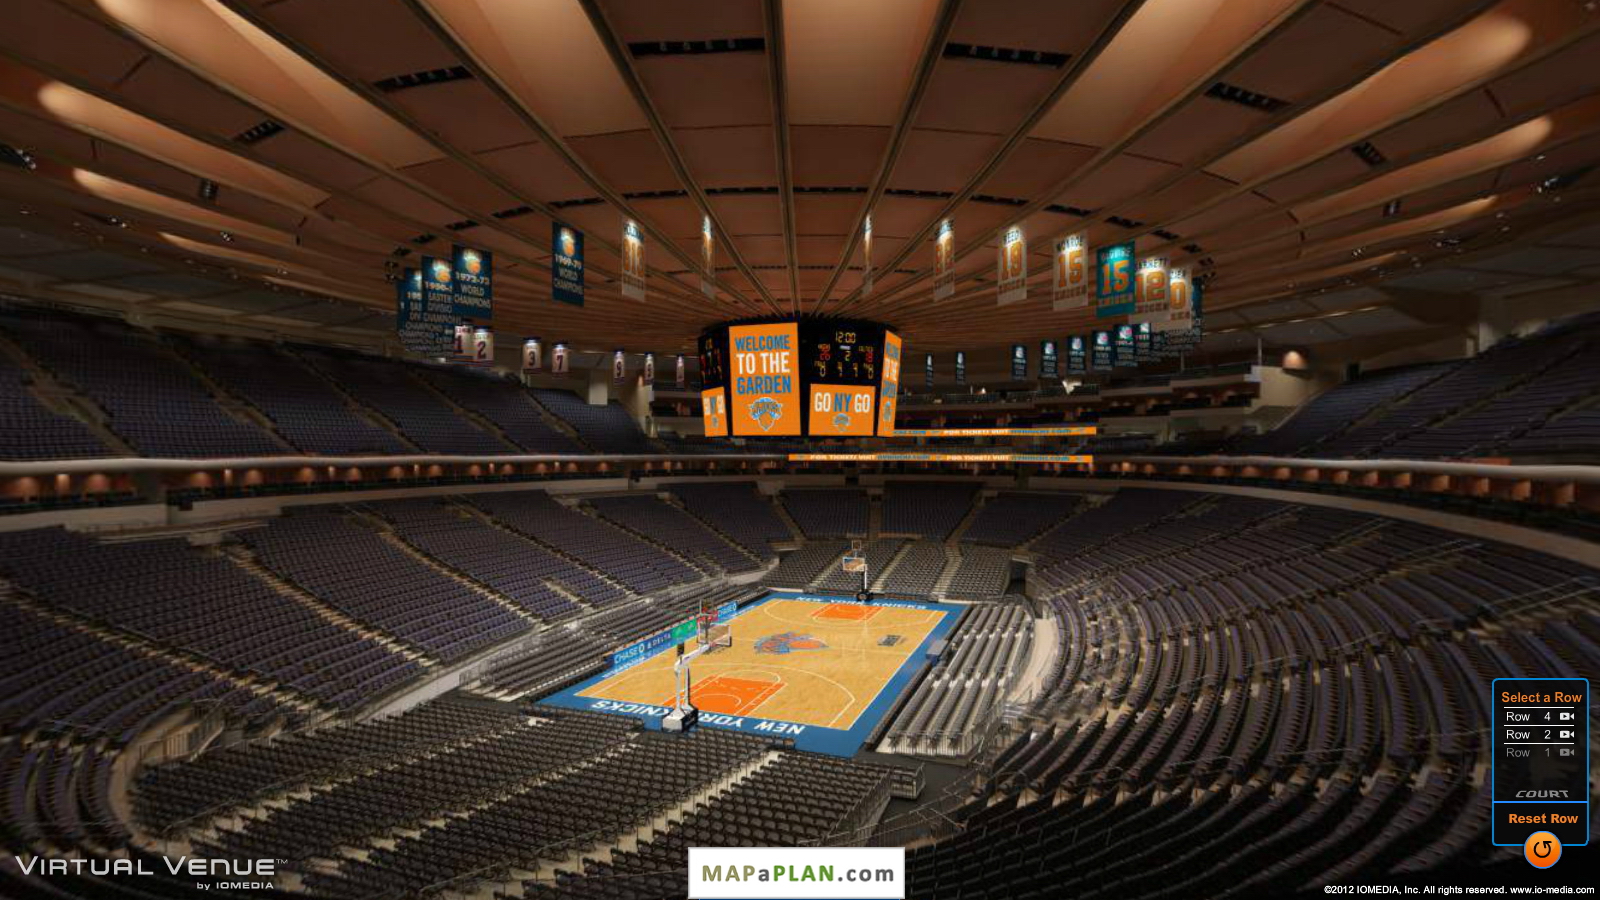 Madison square garden seating chart View from section 219